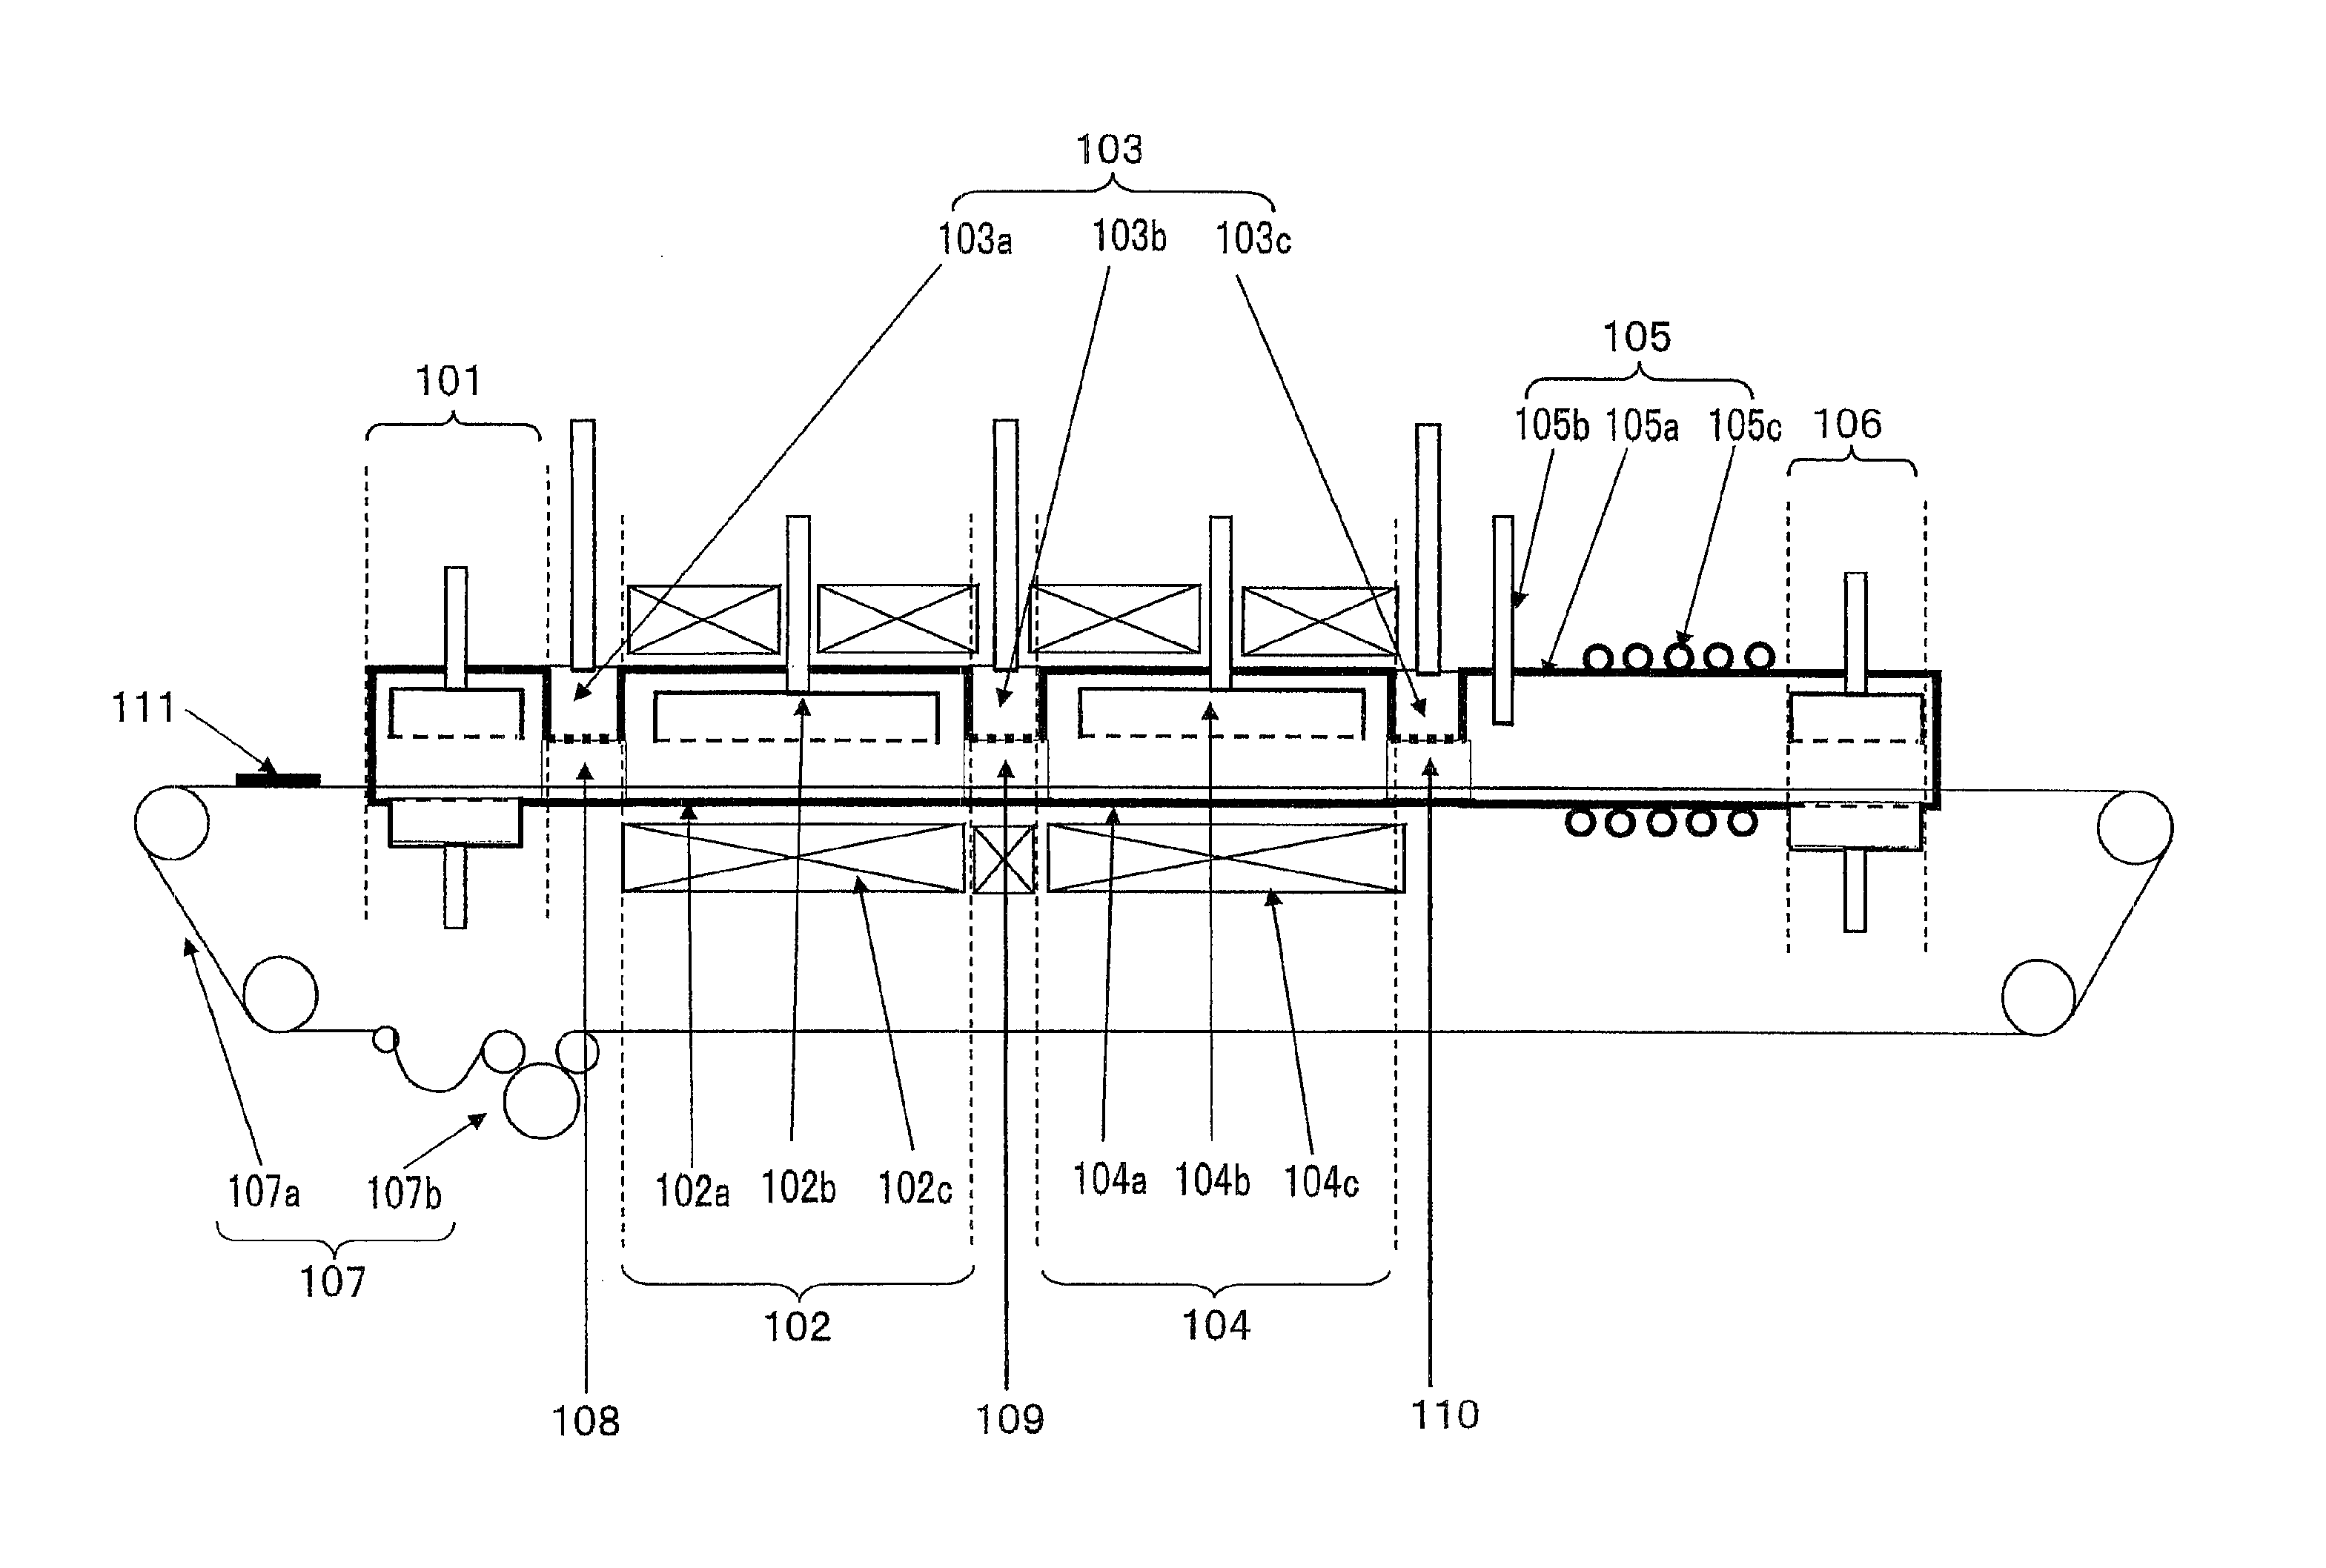 Apparatus and method for producing aligned carbon-nanotube aggregates